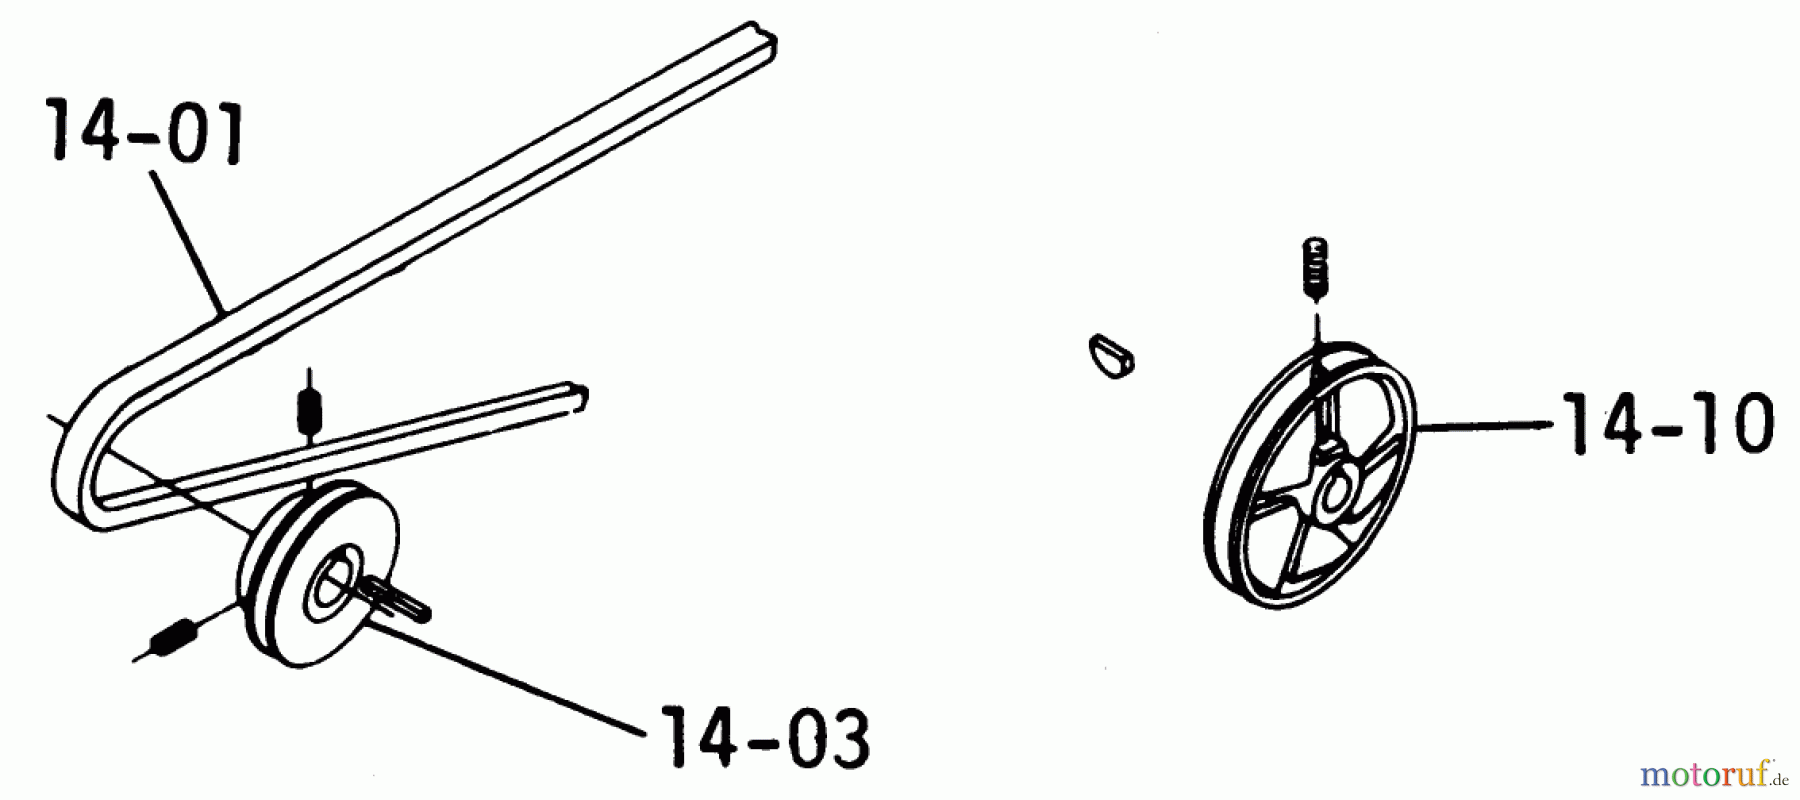  Toro Neu Mowers, Lawn & Garden Tractor Seite 1 1-0391 (C-100) - Toro C-100 8-Speed Tractor, 1975 14.000 DRIVE BELTS AND PULLEYS (FIG. 14A)